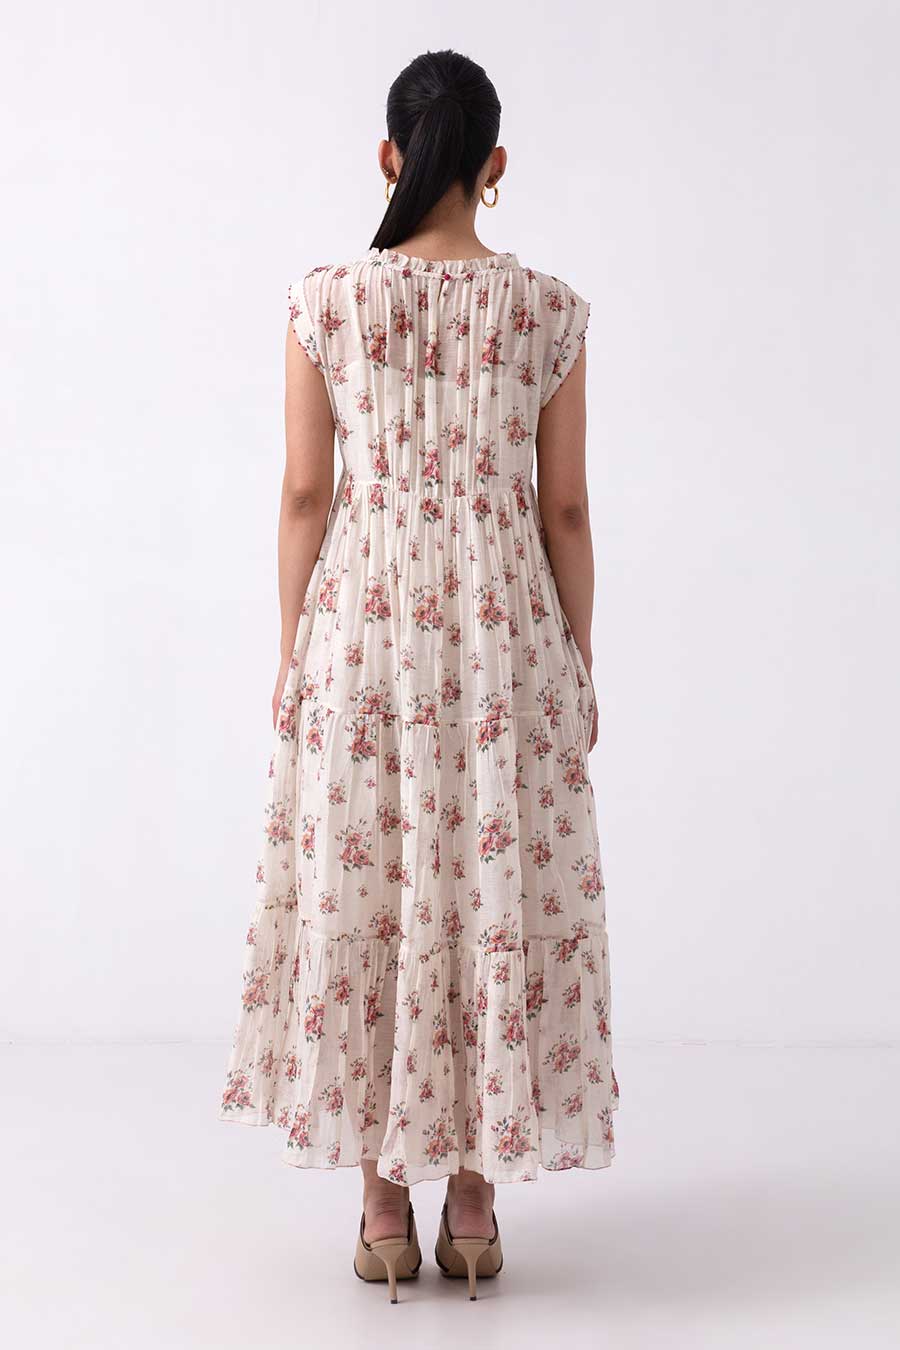 Off-White Floral Printed Tier Dress